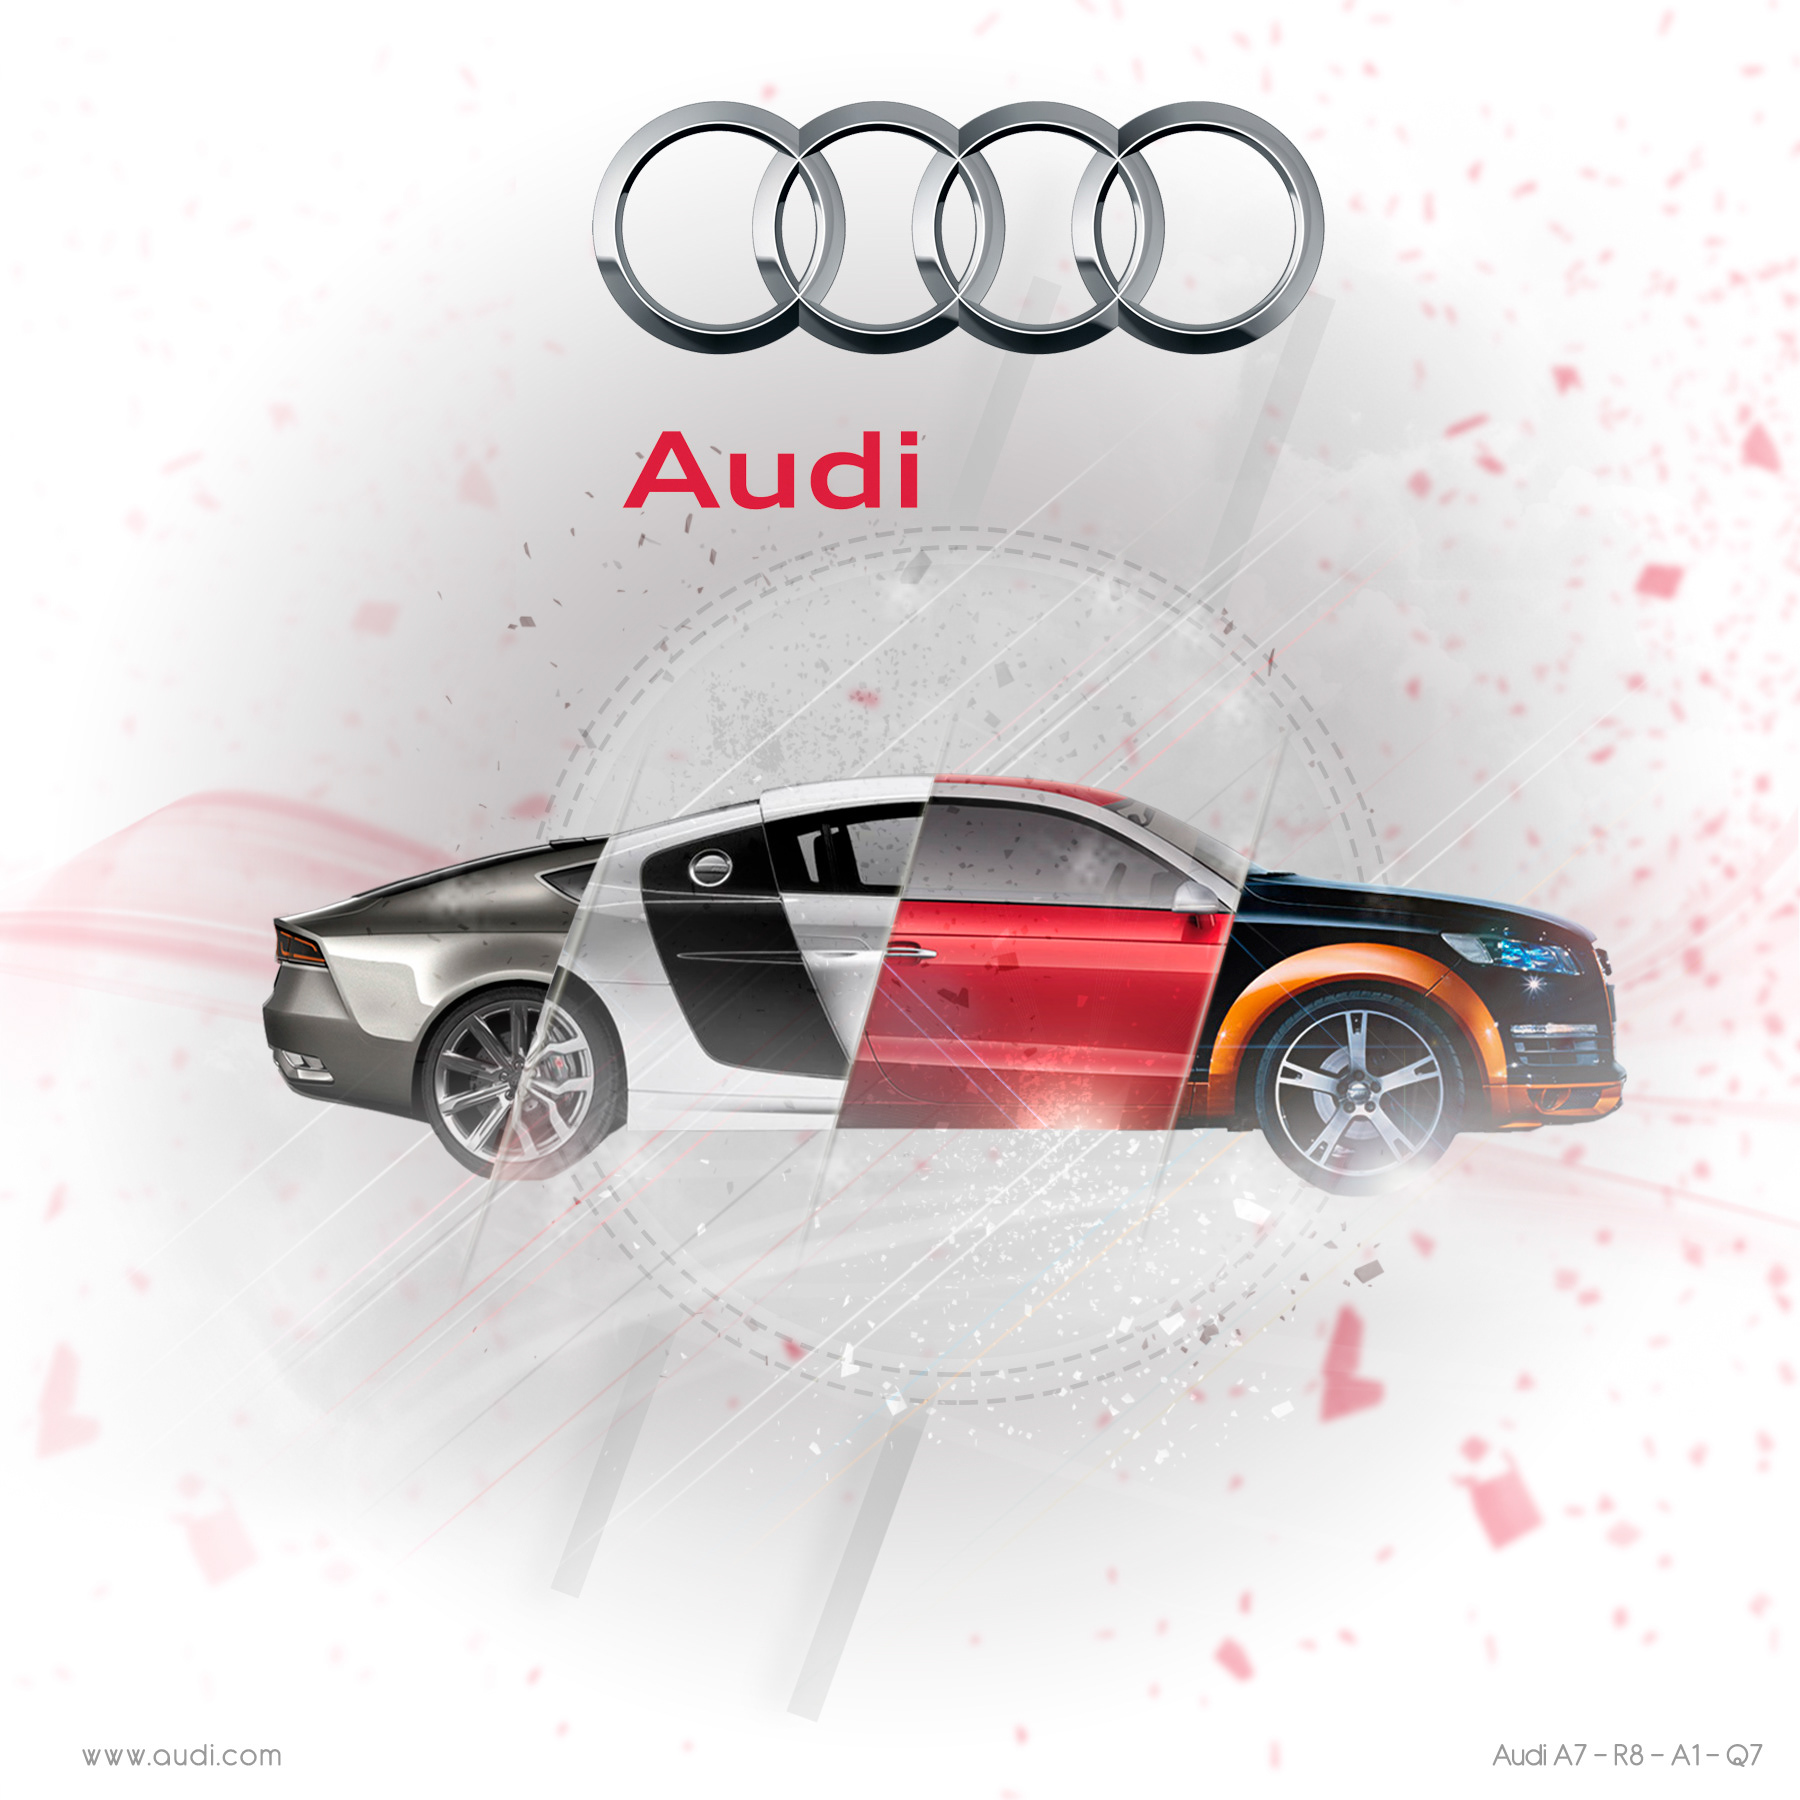 Audi Collection | Behance